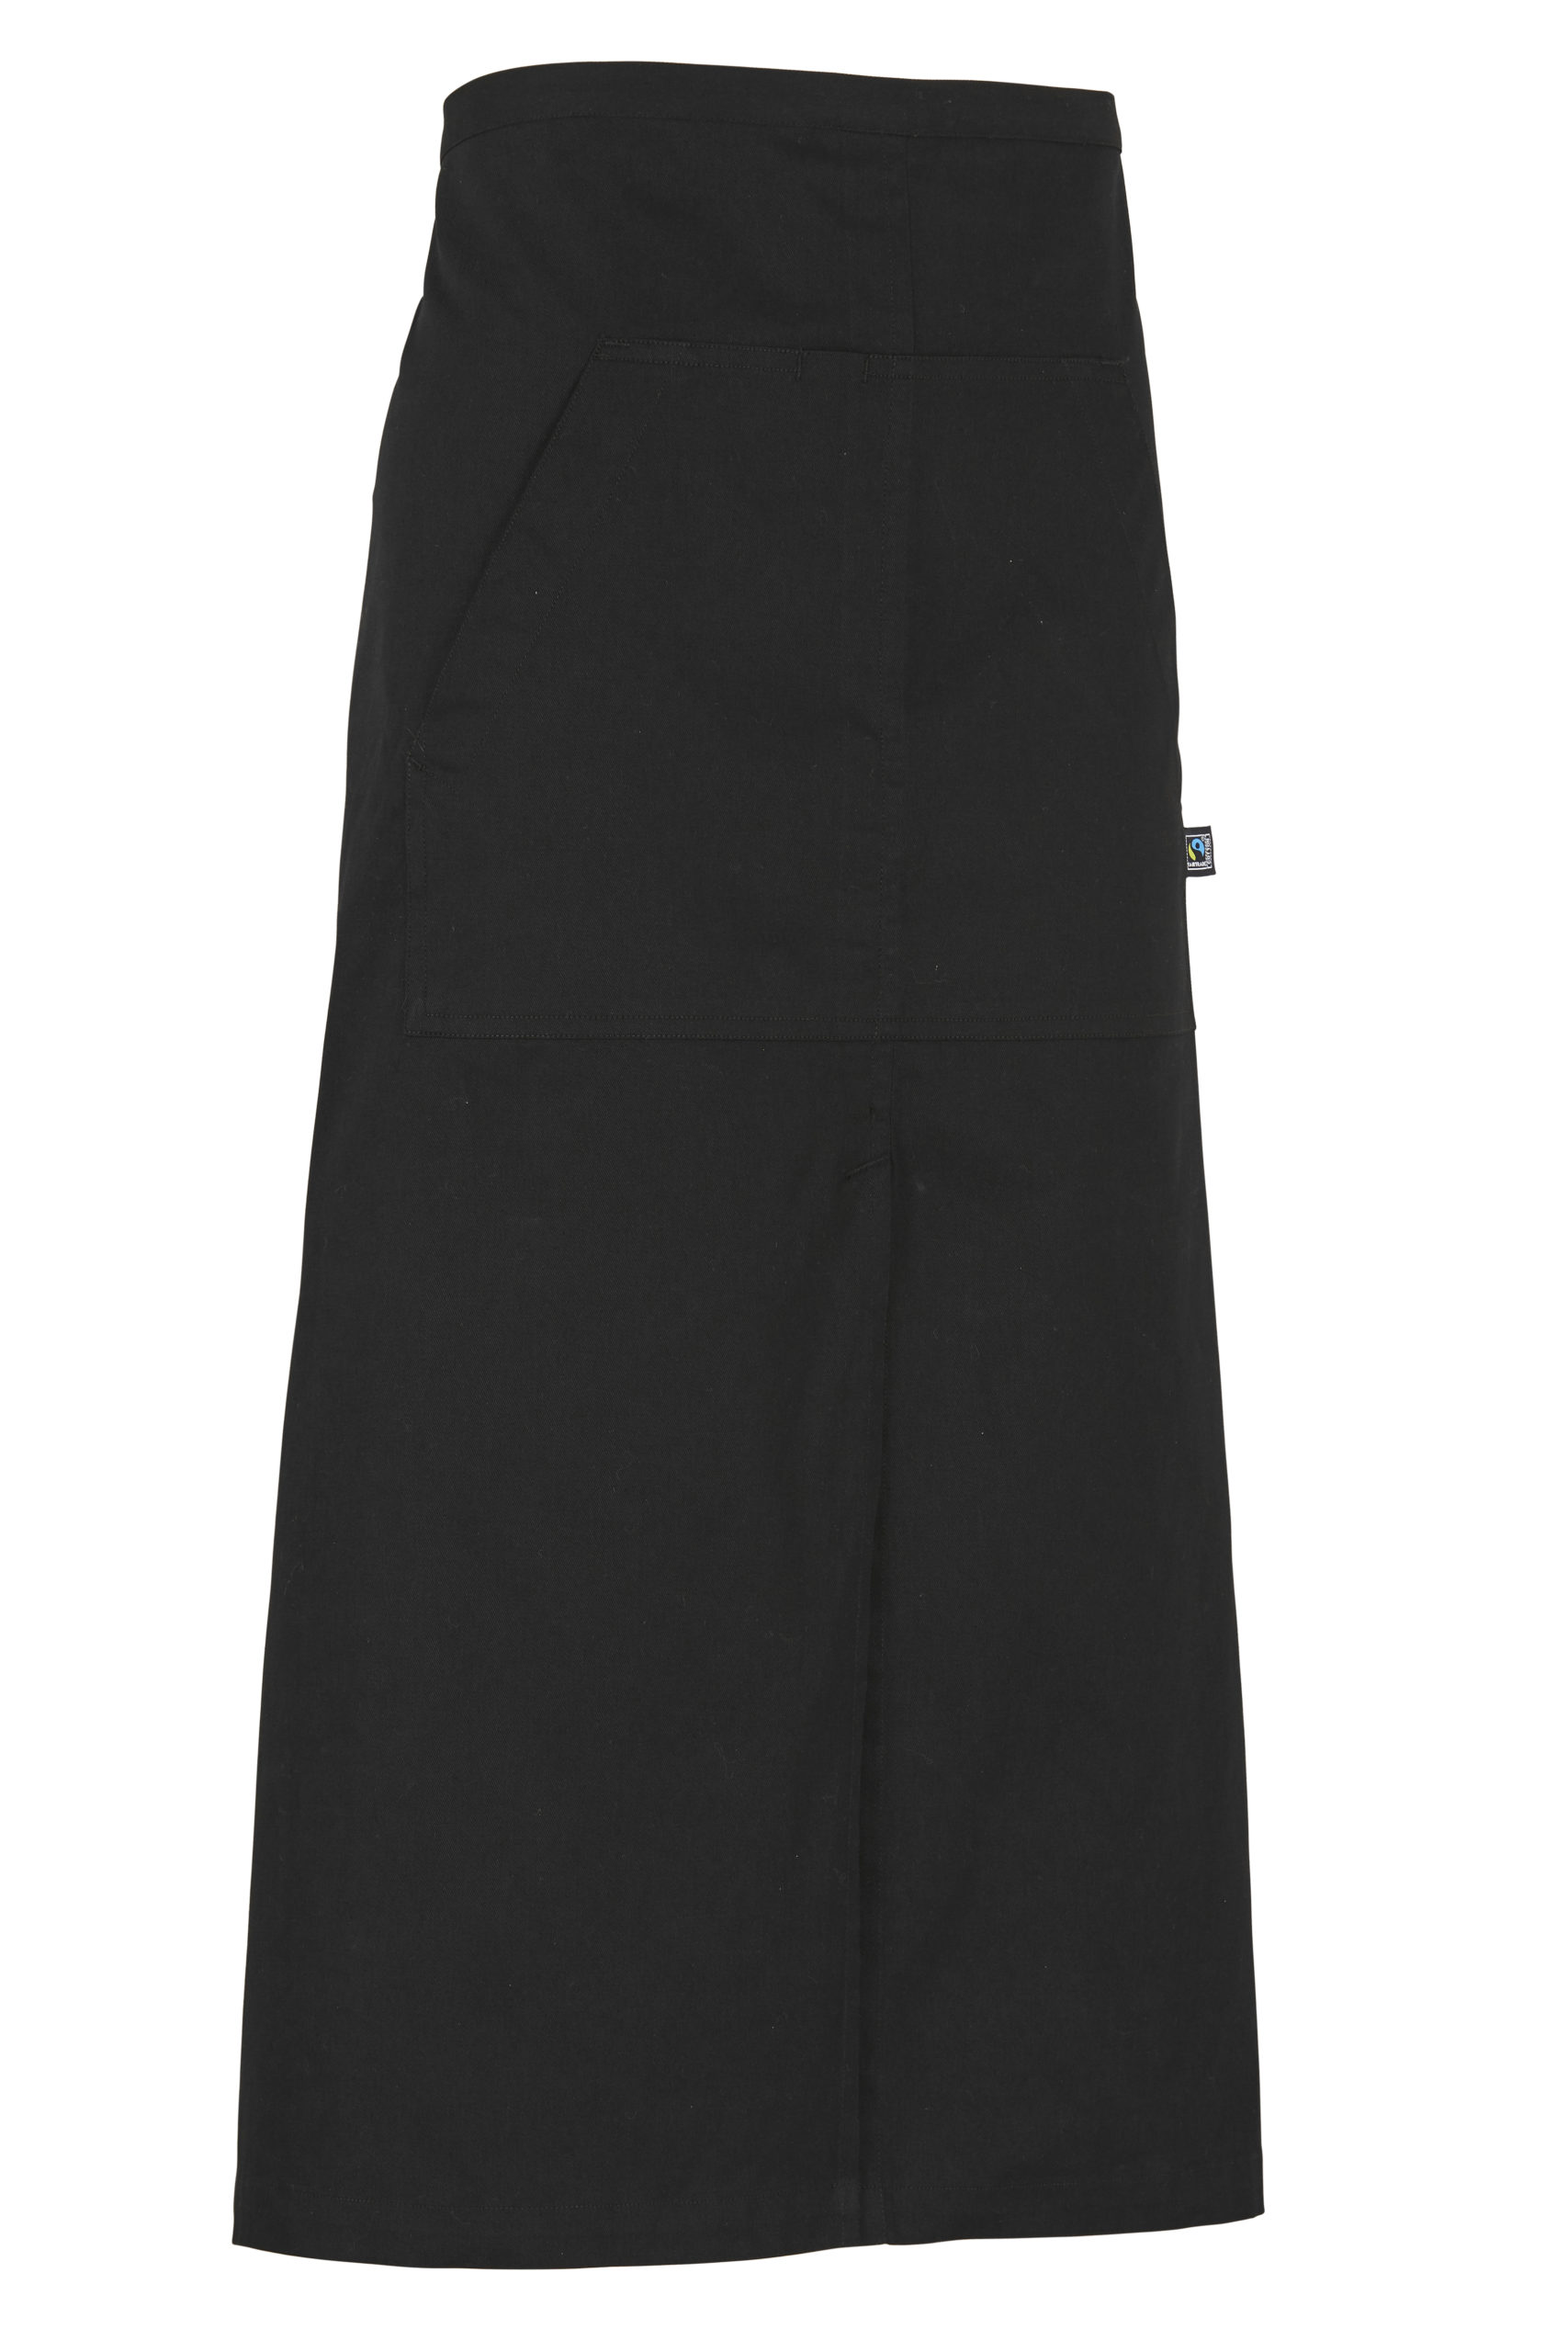 Cottover Waist Apron Long Musta